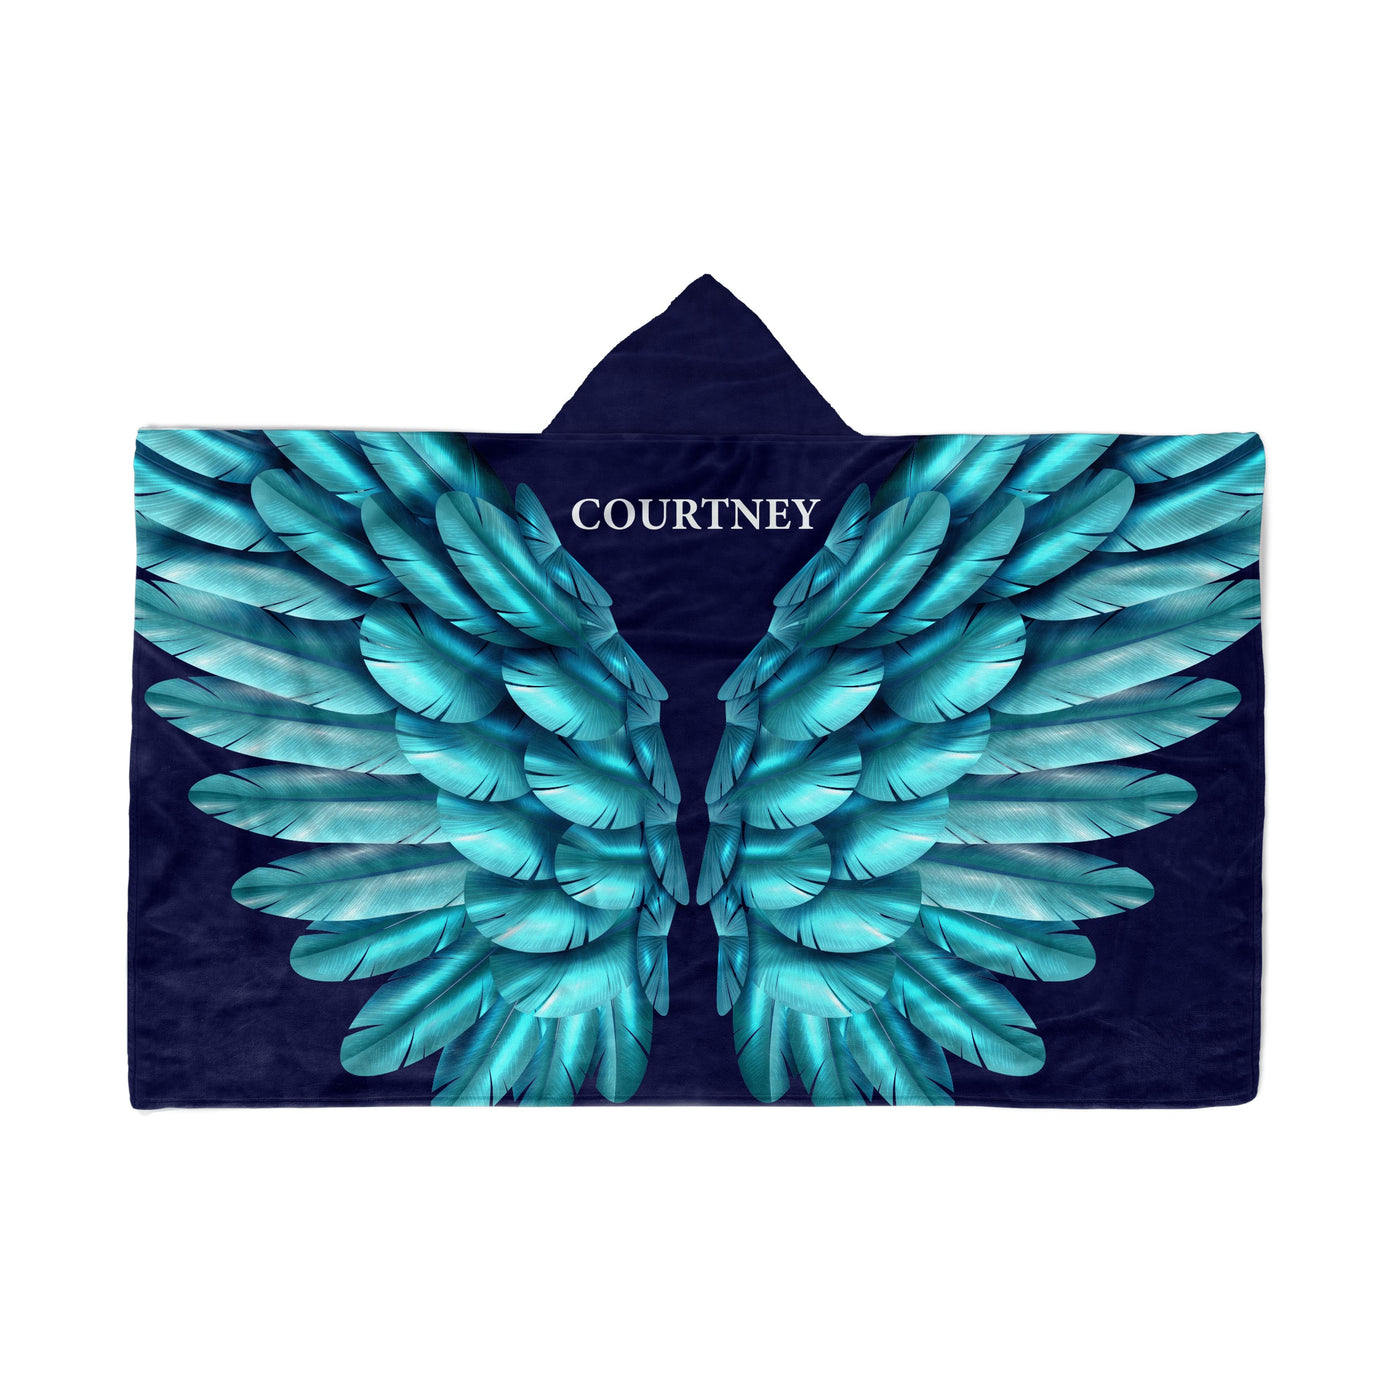 Hooded Fleece Blanket: Turquoise Wings Apparel & Accessories Sam + Zoey  Sam + Zoey